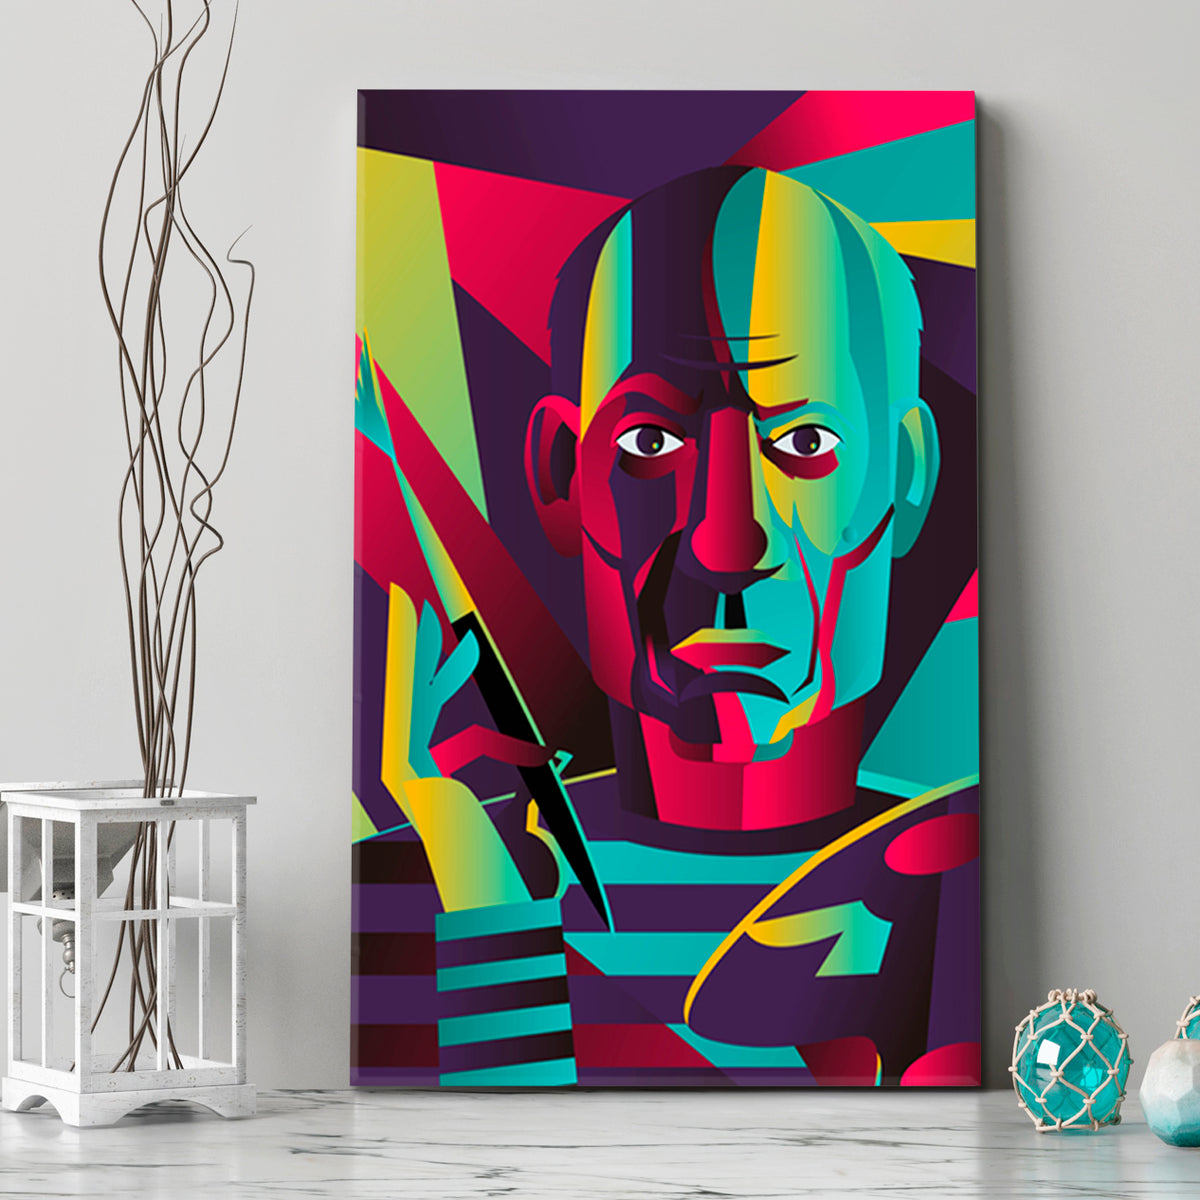 PABLO PICASSO Great Artist Portrait Abstract Colorful Expressionism Cubist Trendy Large Art Print Artesty 1 Panel 16"x24" 